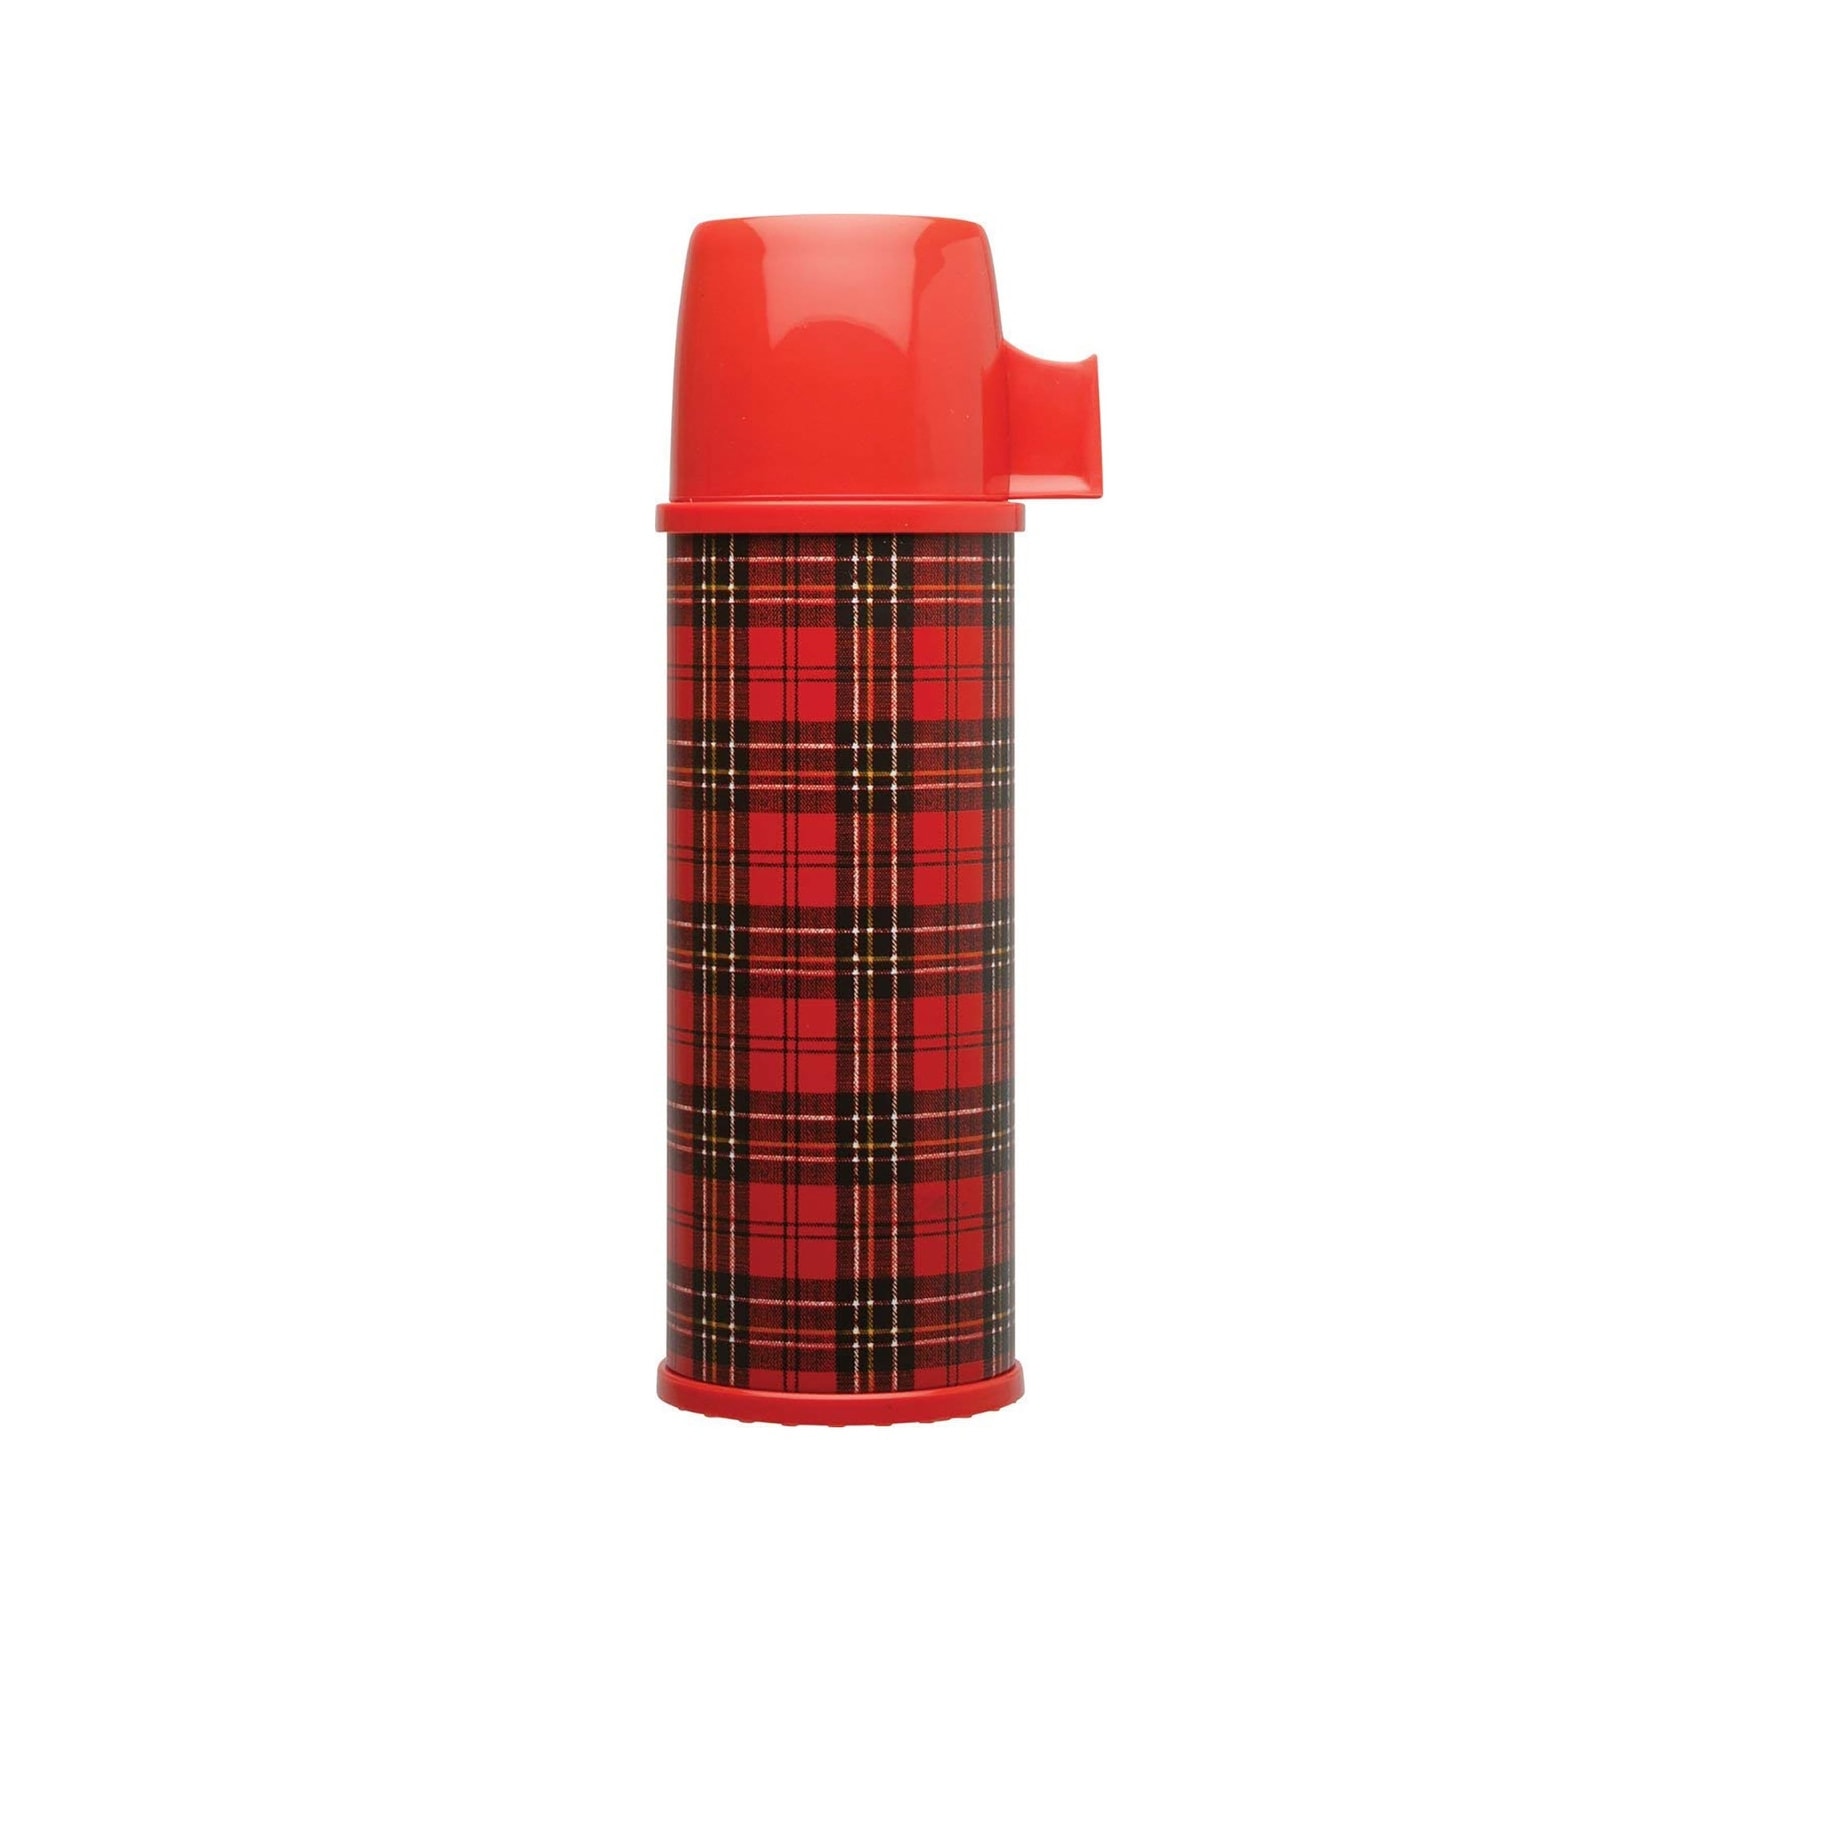 https://ak1.ostkcdn.com/images/products/is/images/direct/daaf6ae2f0c18de84828e1a256ac9d389f435792/Aladdin-Heritage-Plaid-Double-Wall-Vacuum-Insulated-Bottle%2C-Red%2C-24-Ounces.jpg